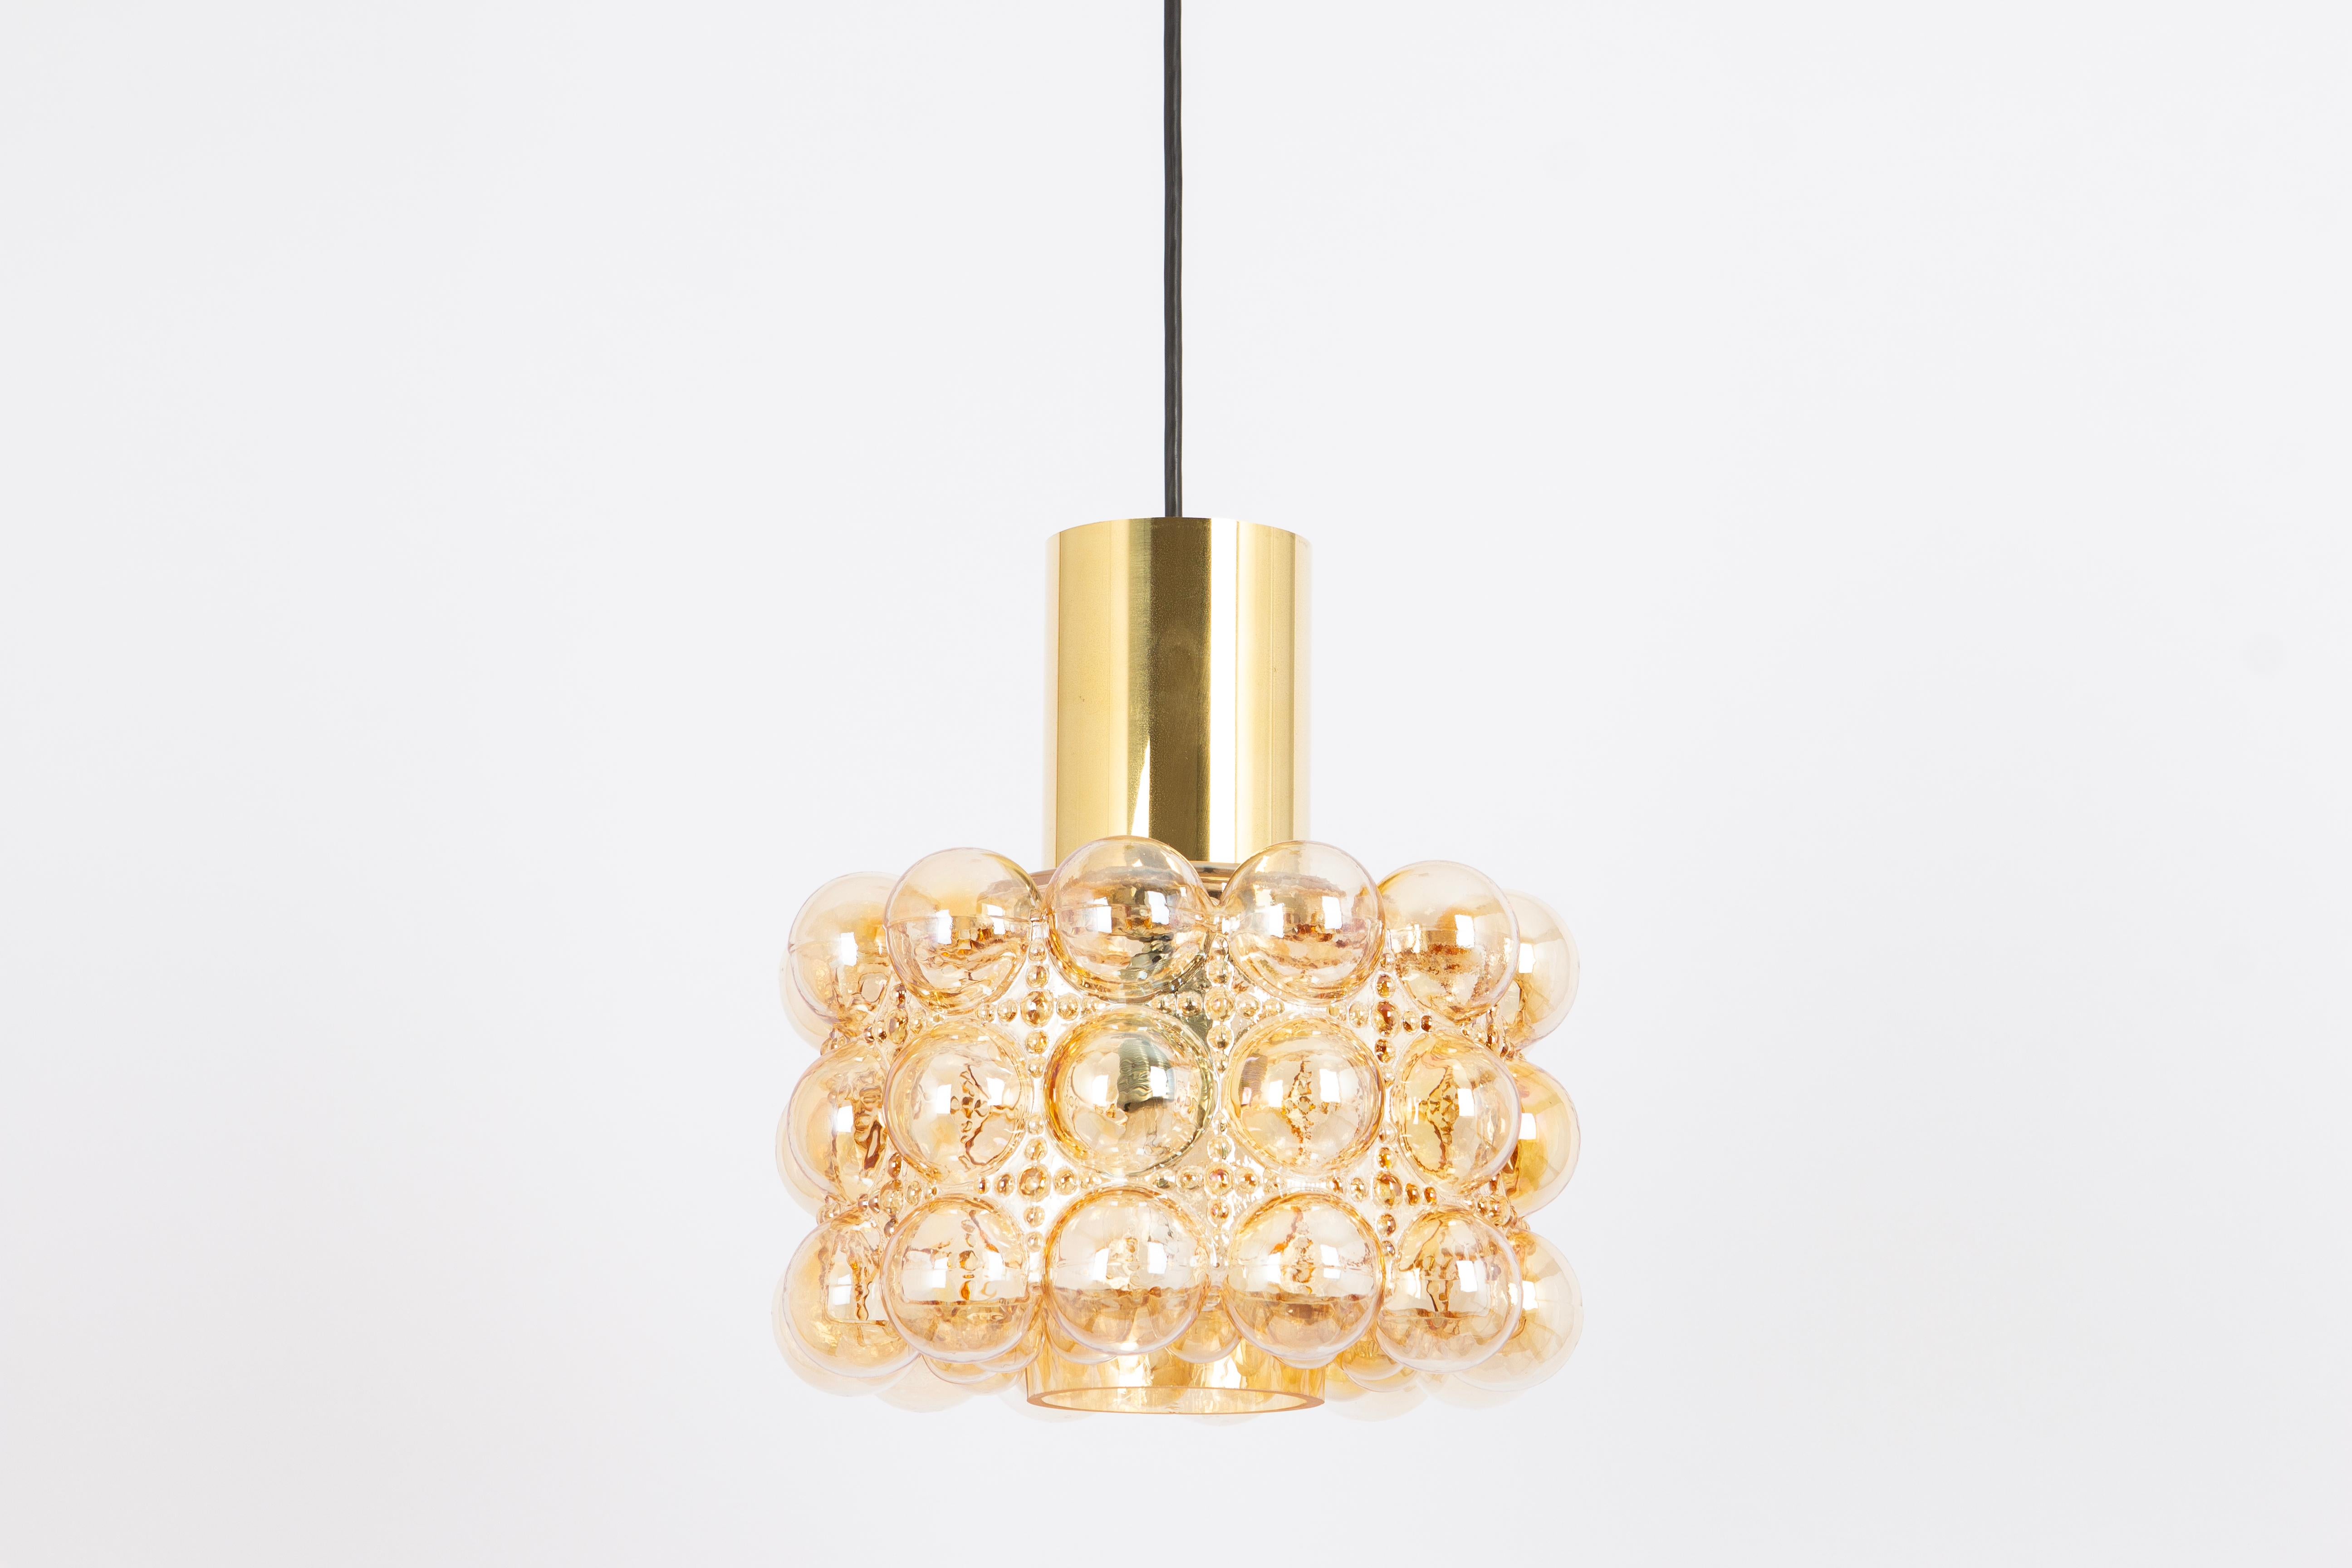 A large round with light smoke tone bubble glass pendant designed by Helena Tynell for Limburg, manufactured in Germany, circa 1970s

Sockets: It needs 1 x E27 standard bulb.
Light bulbs are not included. It is possible to install this fixture in